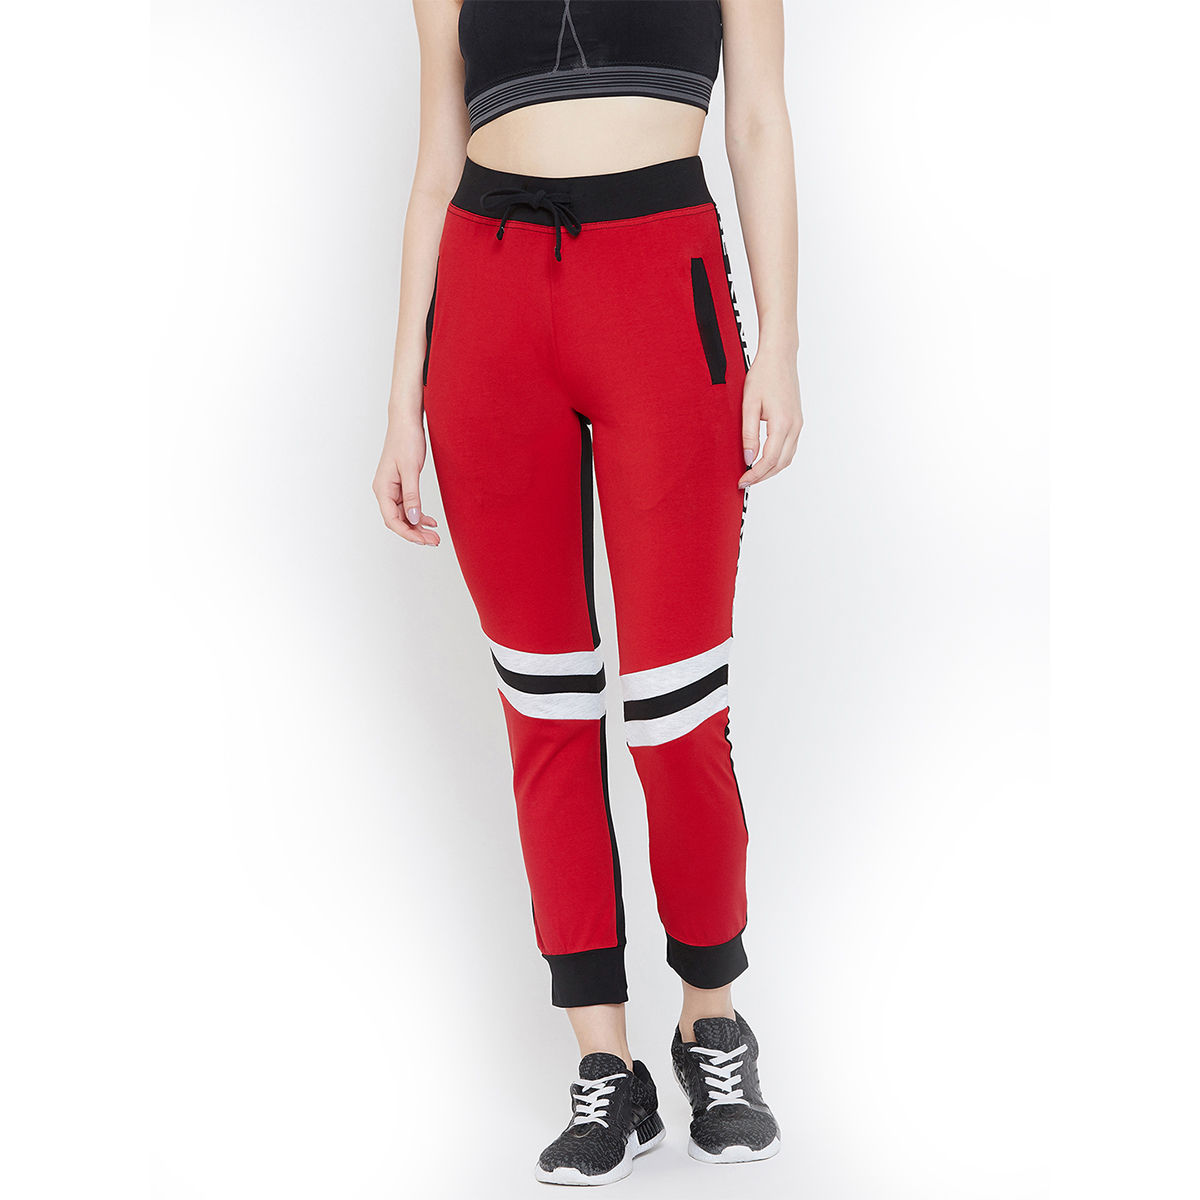 Plaid Black And Red Pants Online  wwwdecisiontreecom 1693418711